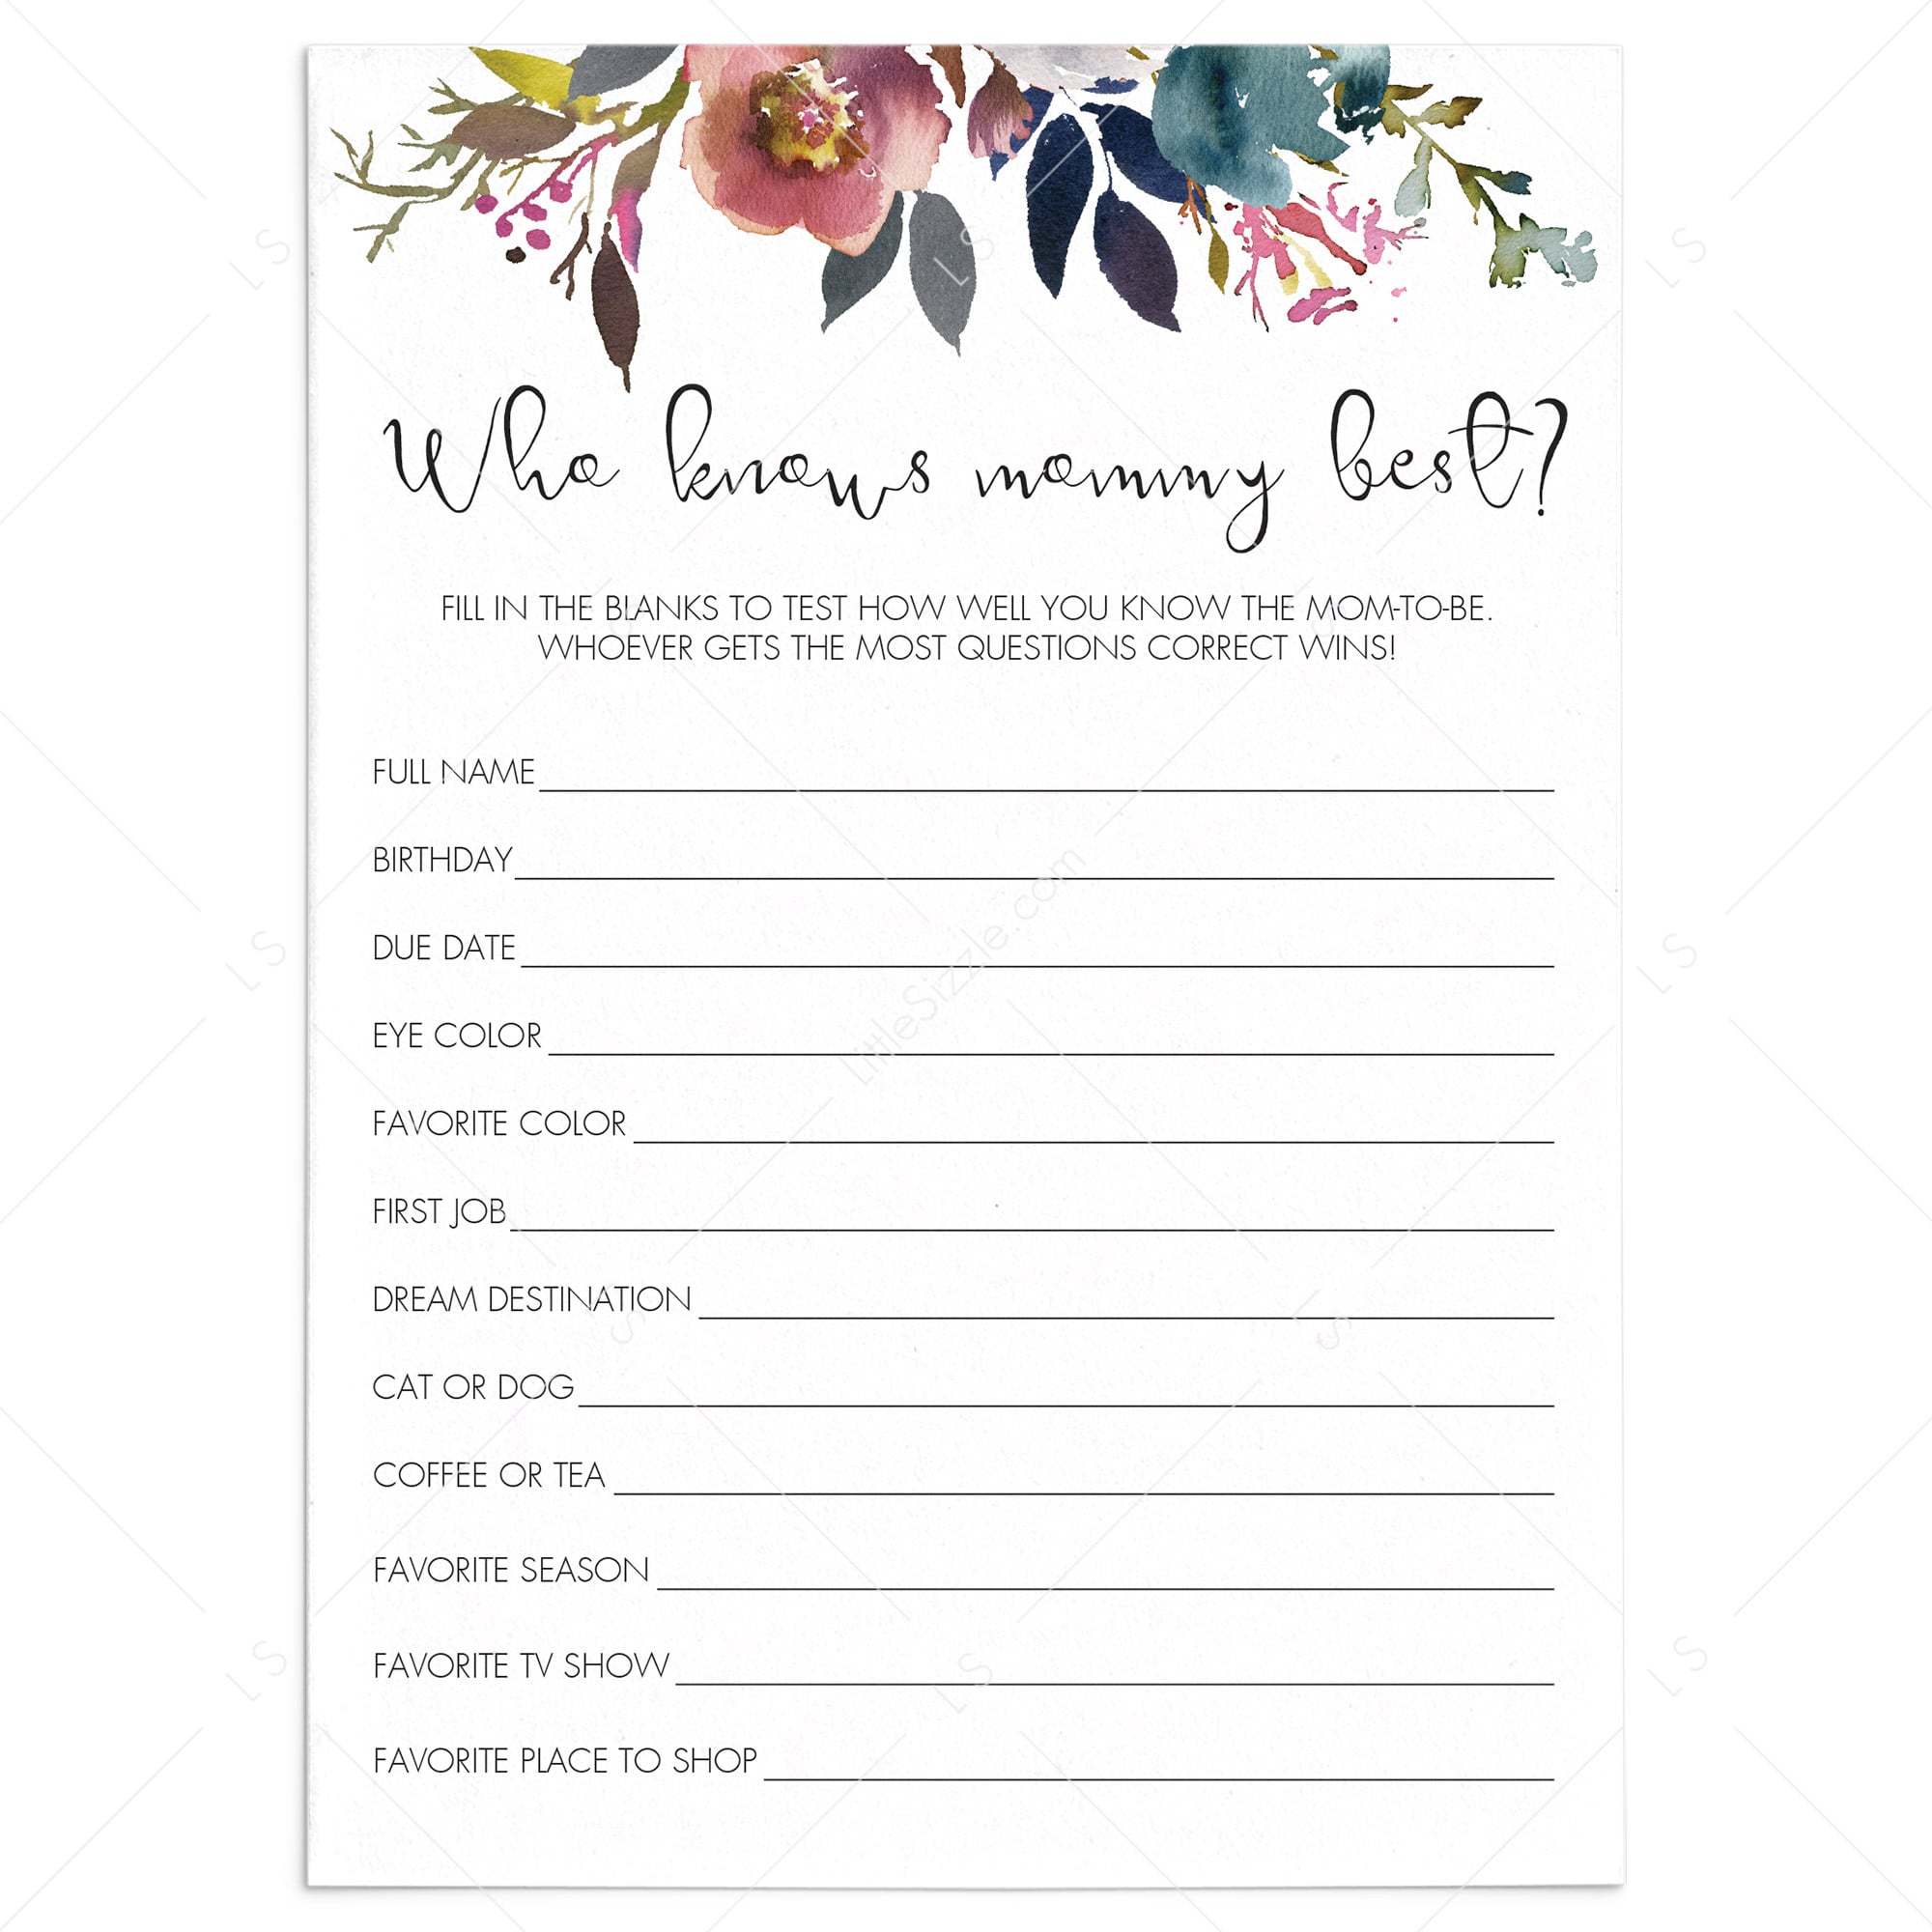 Mommy best baby shower game boho themed by LittleSizzle